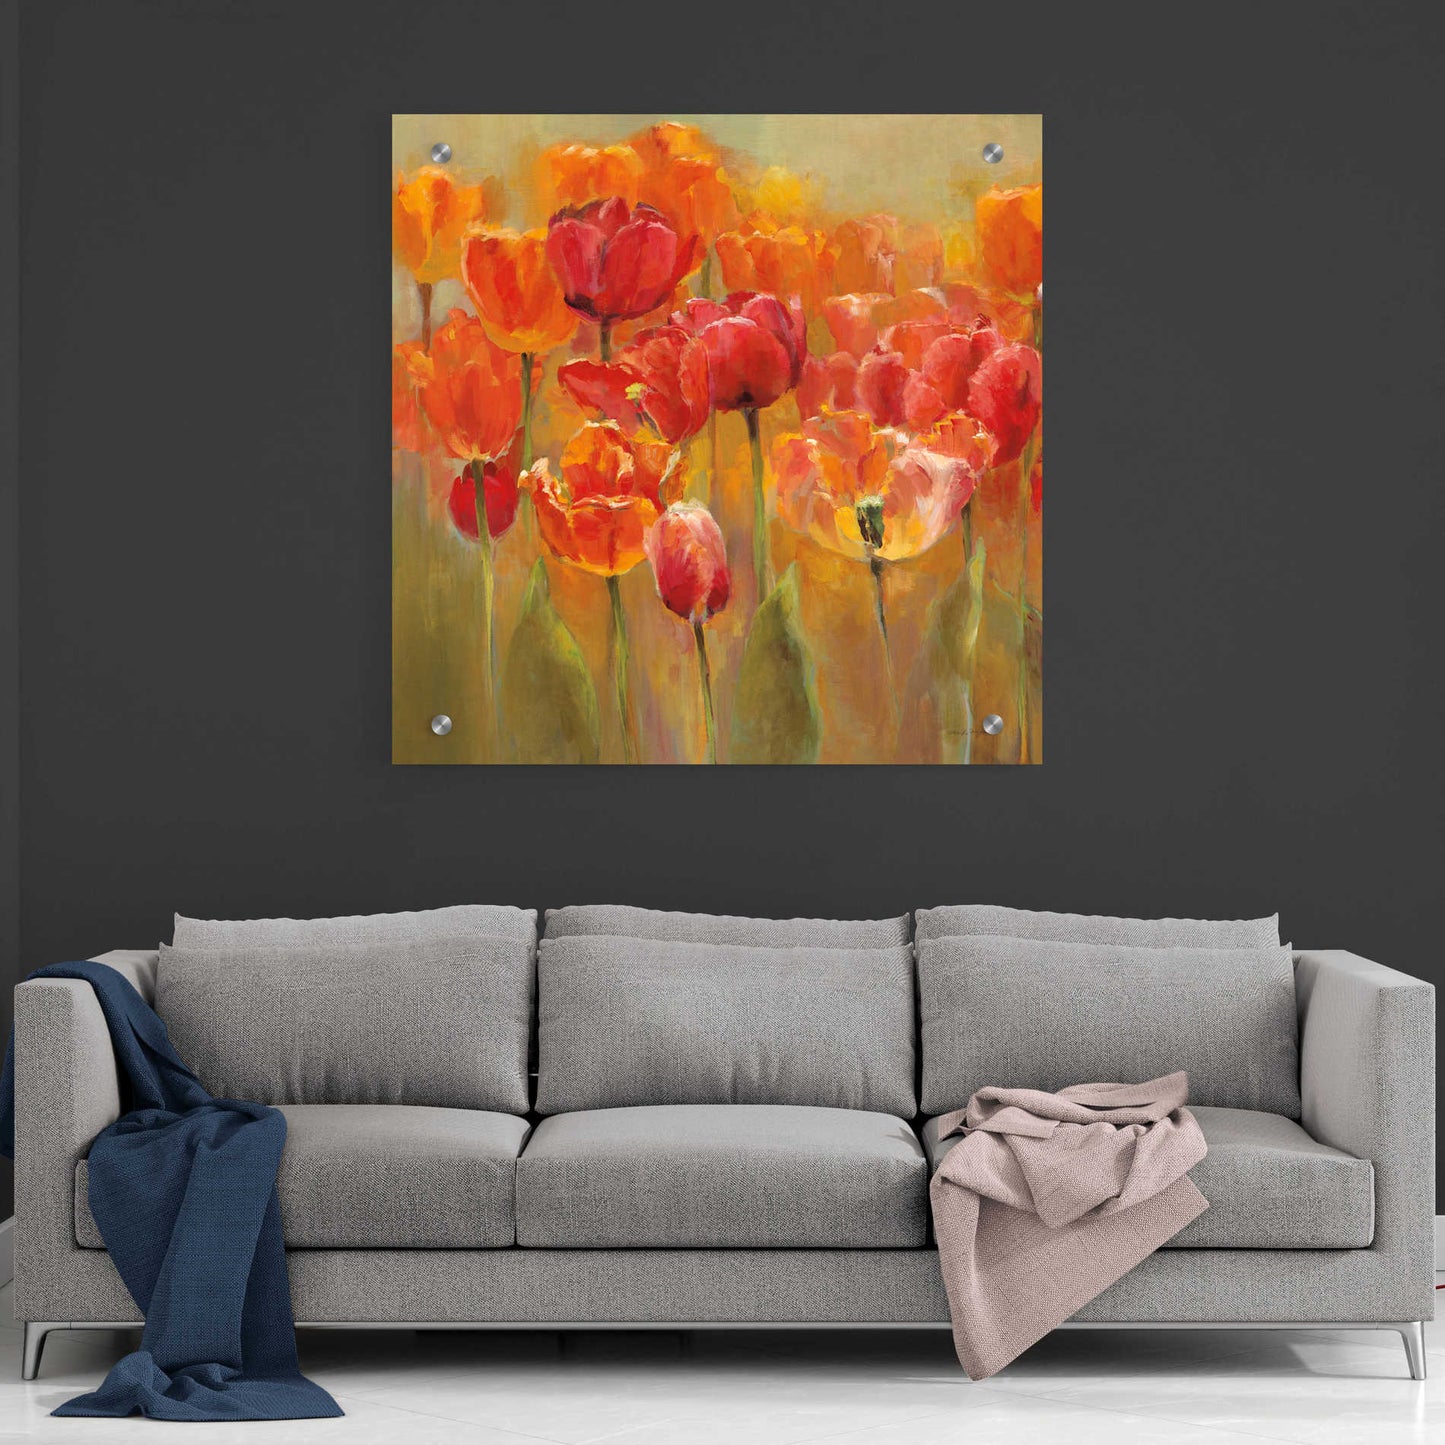 Epic Art 'Tulips in the Midst III Square' by Marilyn Hageman, Acrylic Glass Wall Art,36x36